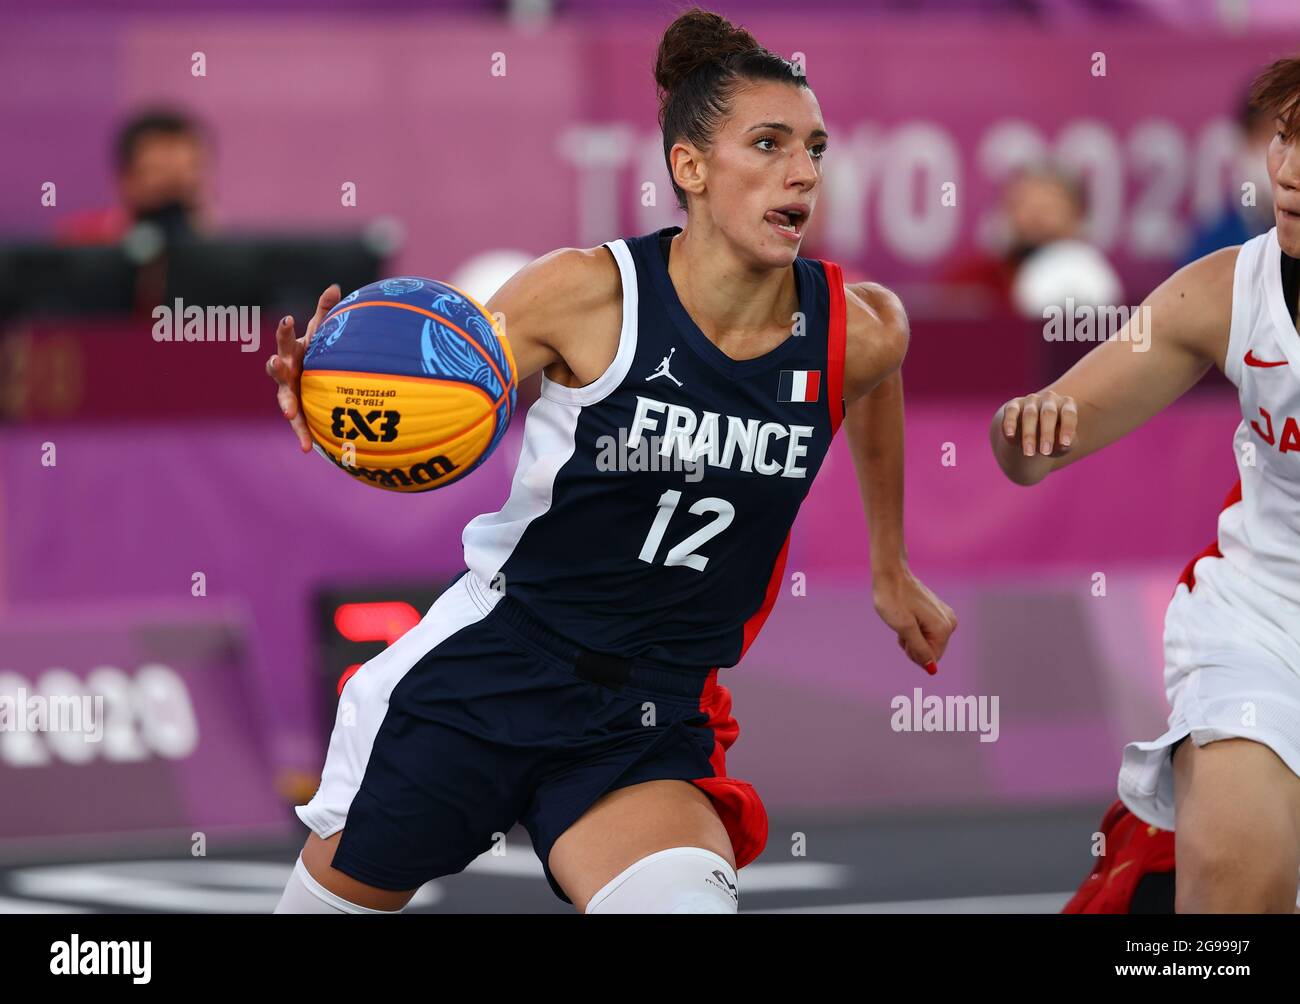 Tokyo 2020 Olympics - Basketball 3x3 - Women - Pool A - Japan v France - Aomi Urban Sports Park, Tokyo, Japan - July 25, 2021. Laetitia Guapo of France in action during a match. REUTERS/Andrew Boyers Stock Photo